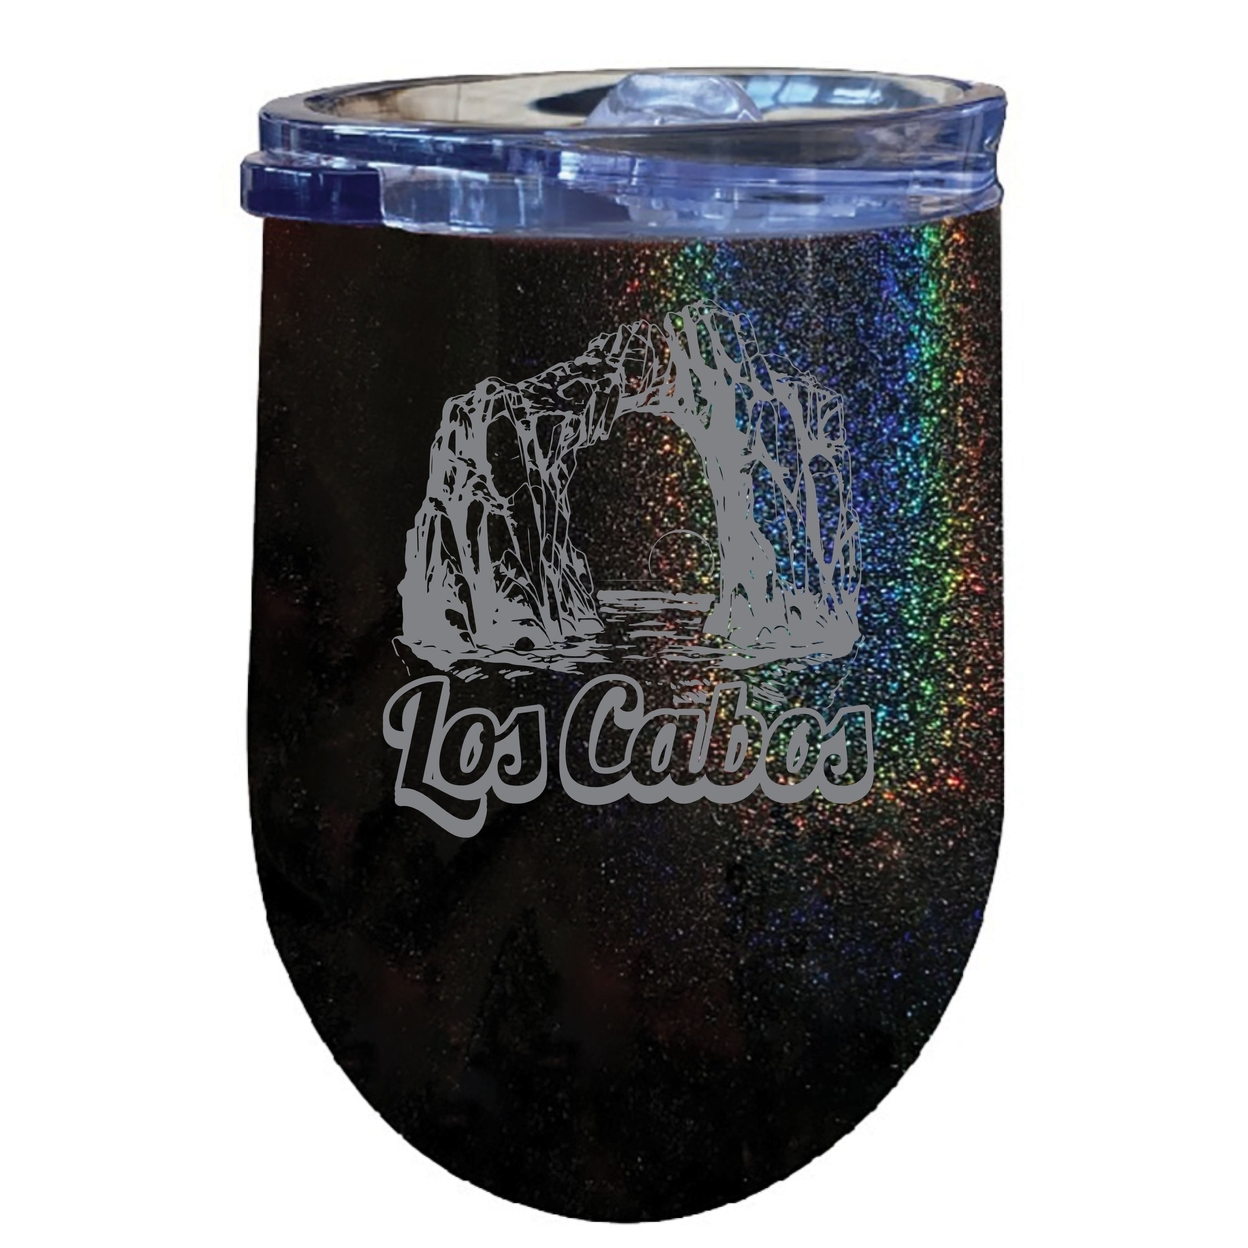 Los Cabos Mexico Souvenir 12 Oz Engraved Insulated Wine Stainless Steel Tumbler - Seafoam,,4-Pack